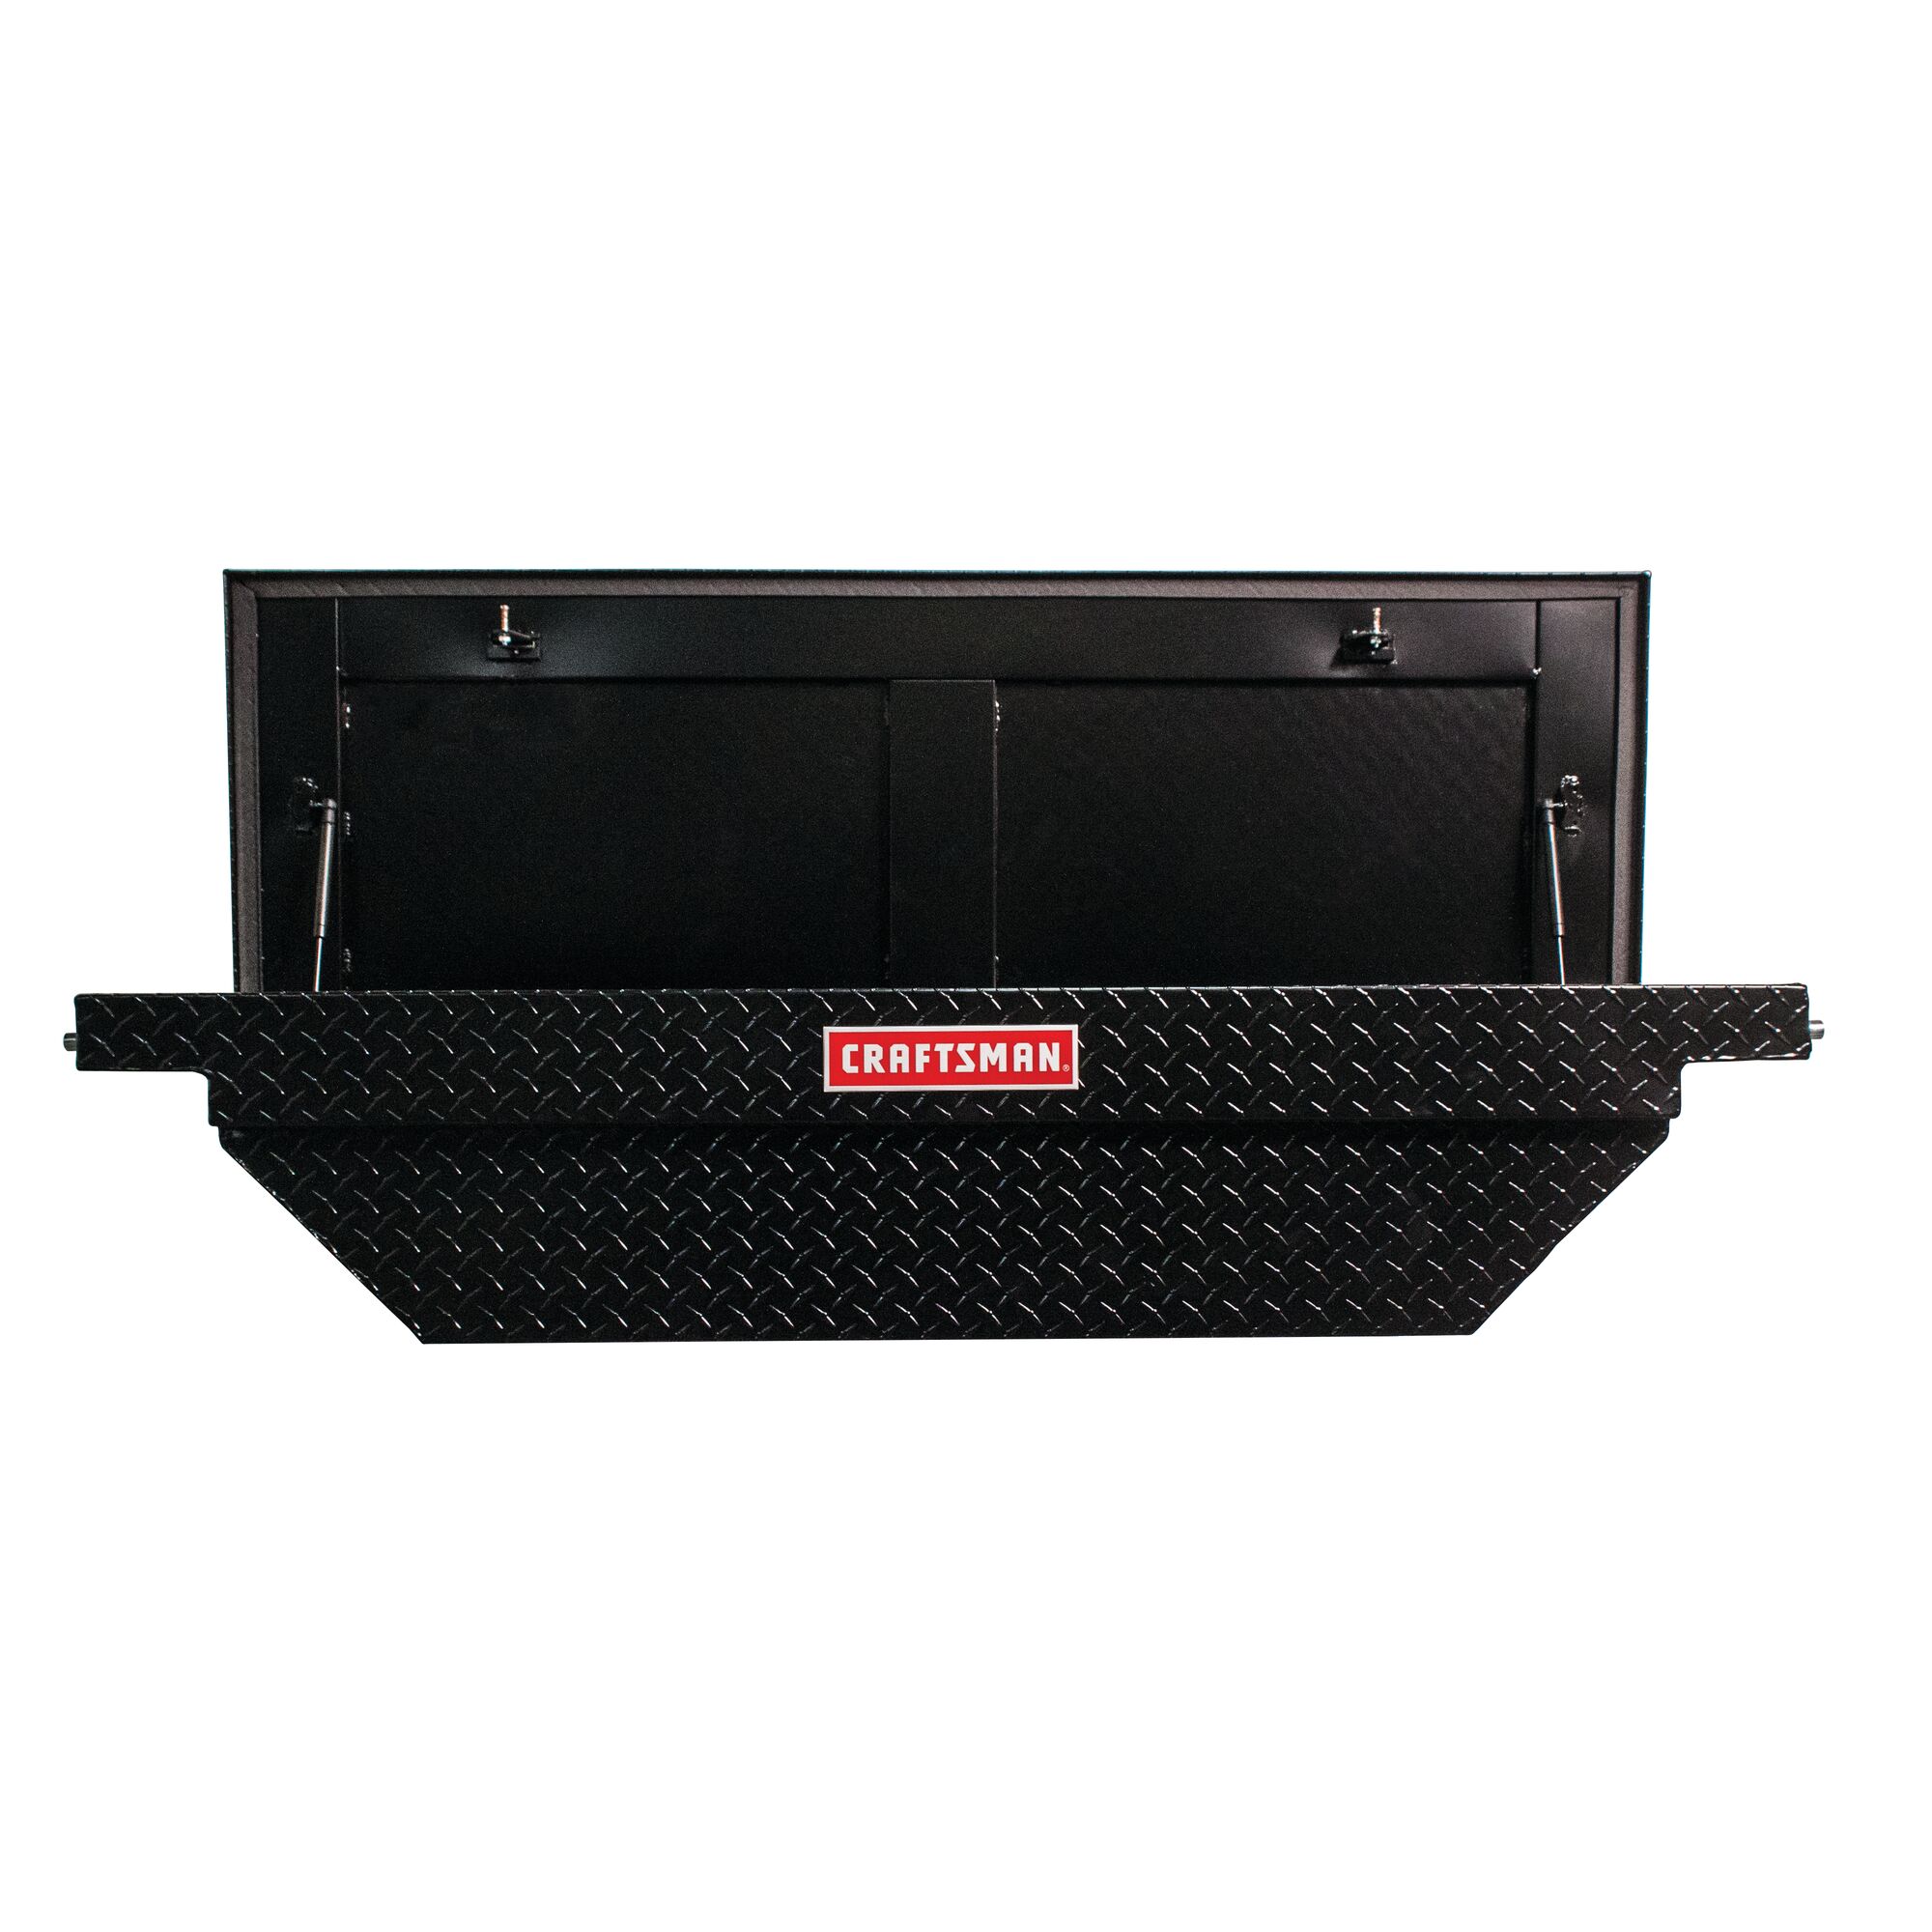 61.5 inch by 20 inch by 13 inch Matte black aluminum crossover truck tool box opened.